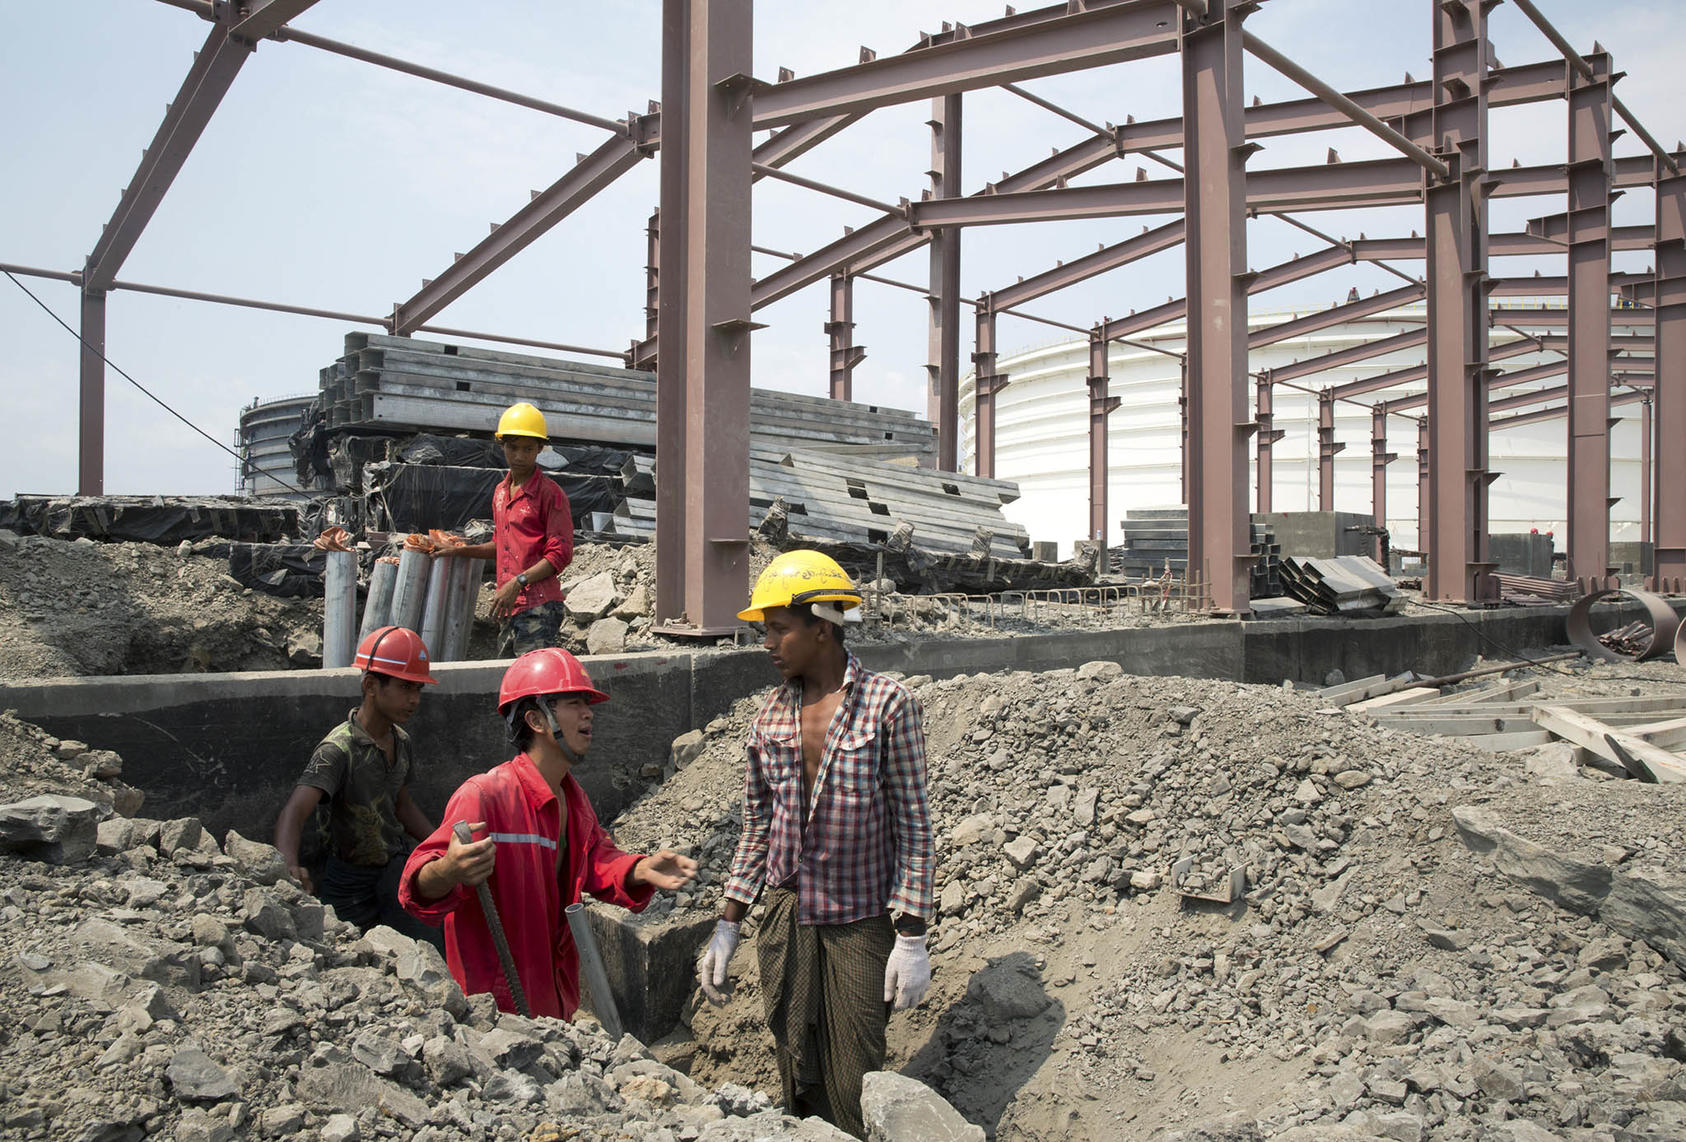 A Chinese worker tries to communicate with Burmese workers near new oil storage tanks for a Chinese oil and gas pipeline project, on Myanmar's Maday Island, May 4, 2013. (Sim Chi Yin/The New York Times)